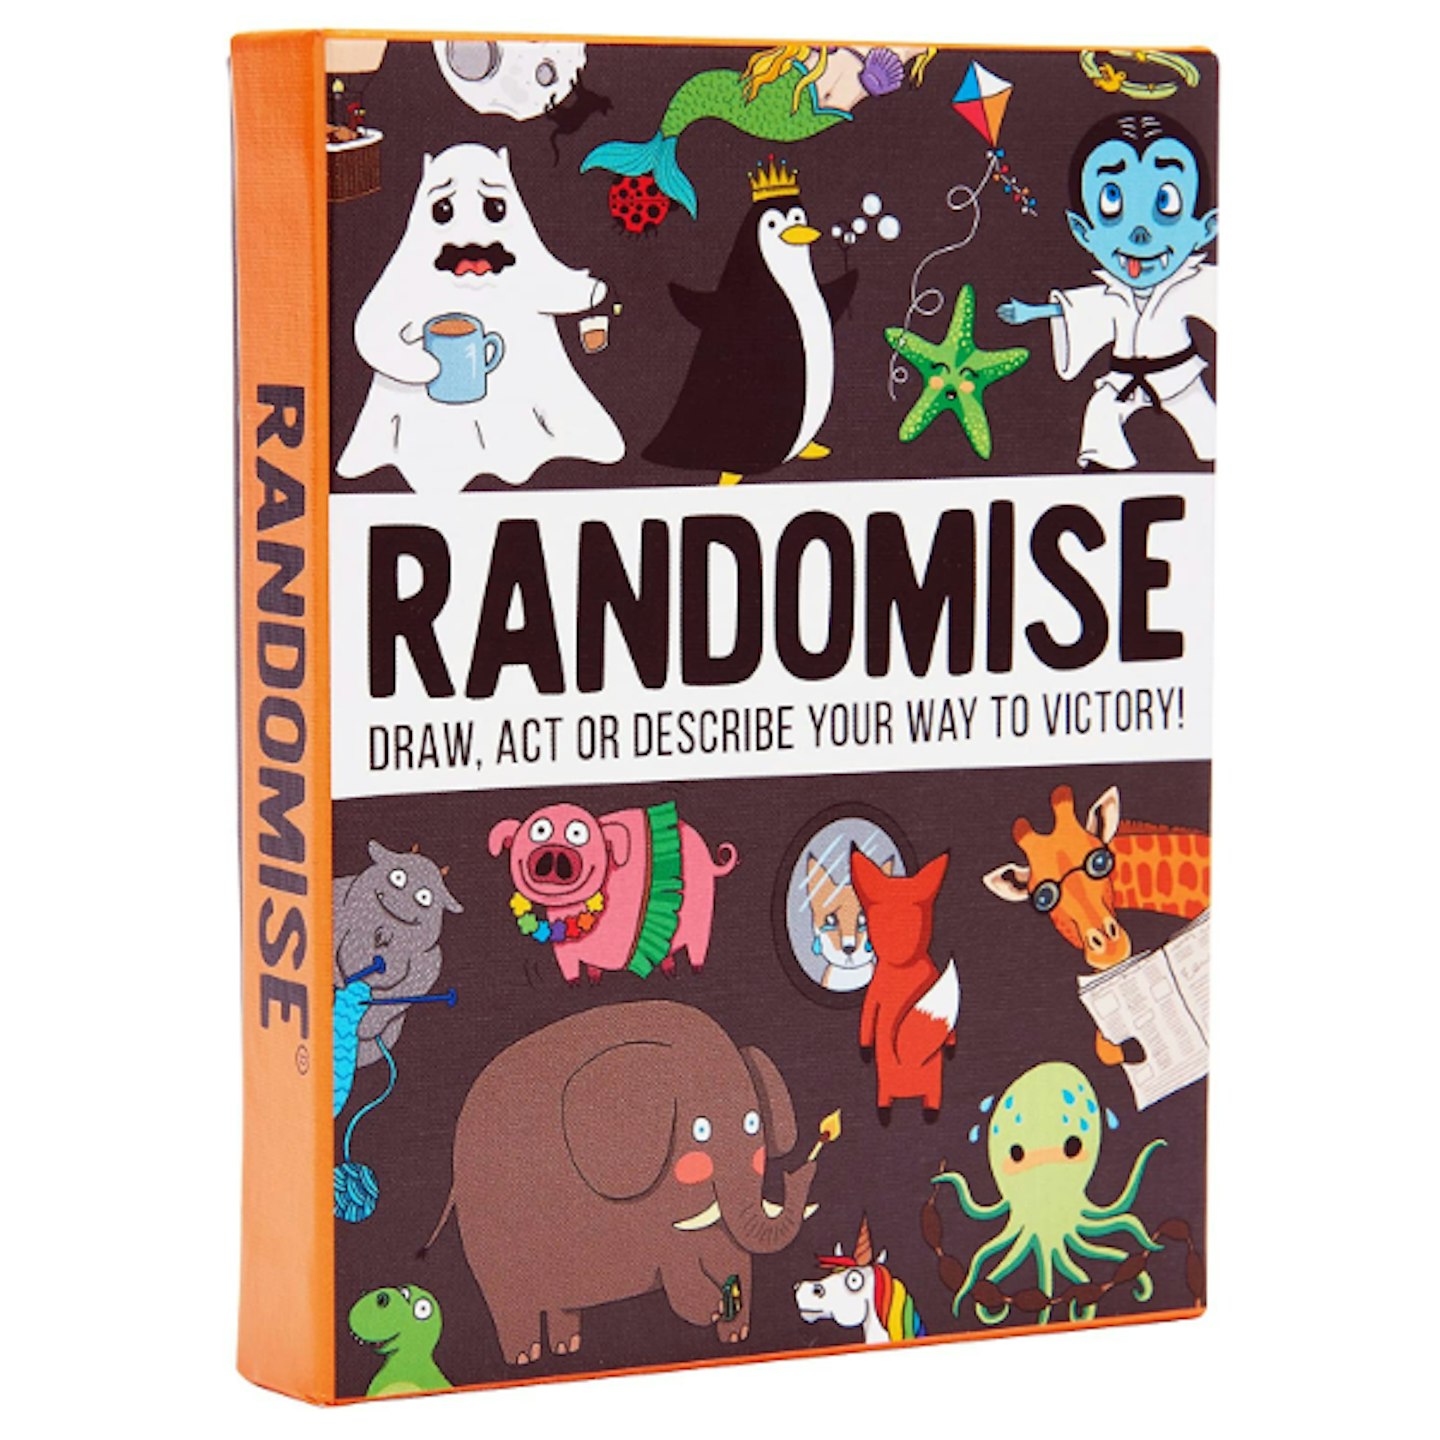 Randomise: The Hilarious Pocket-sized Party Game from The Gamely Store